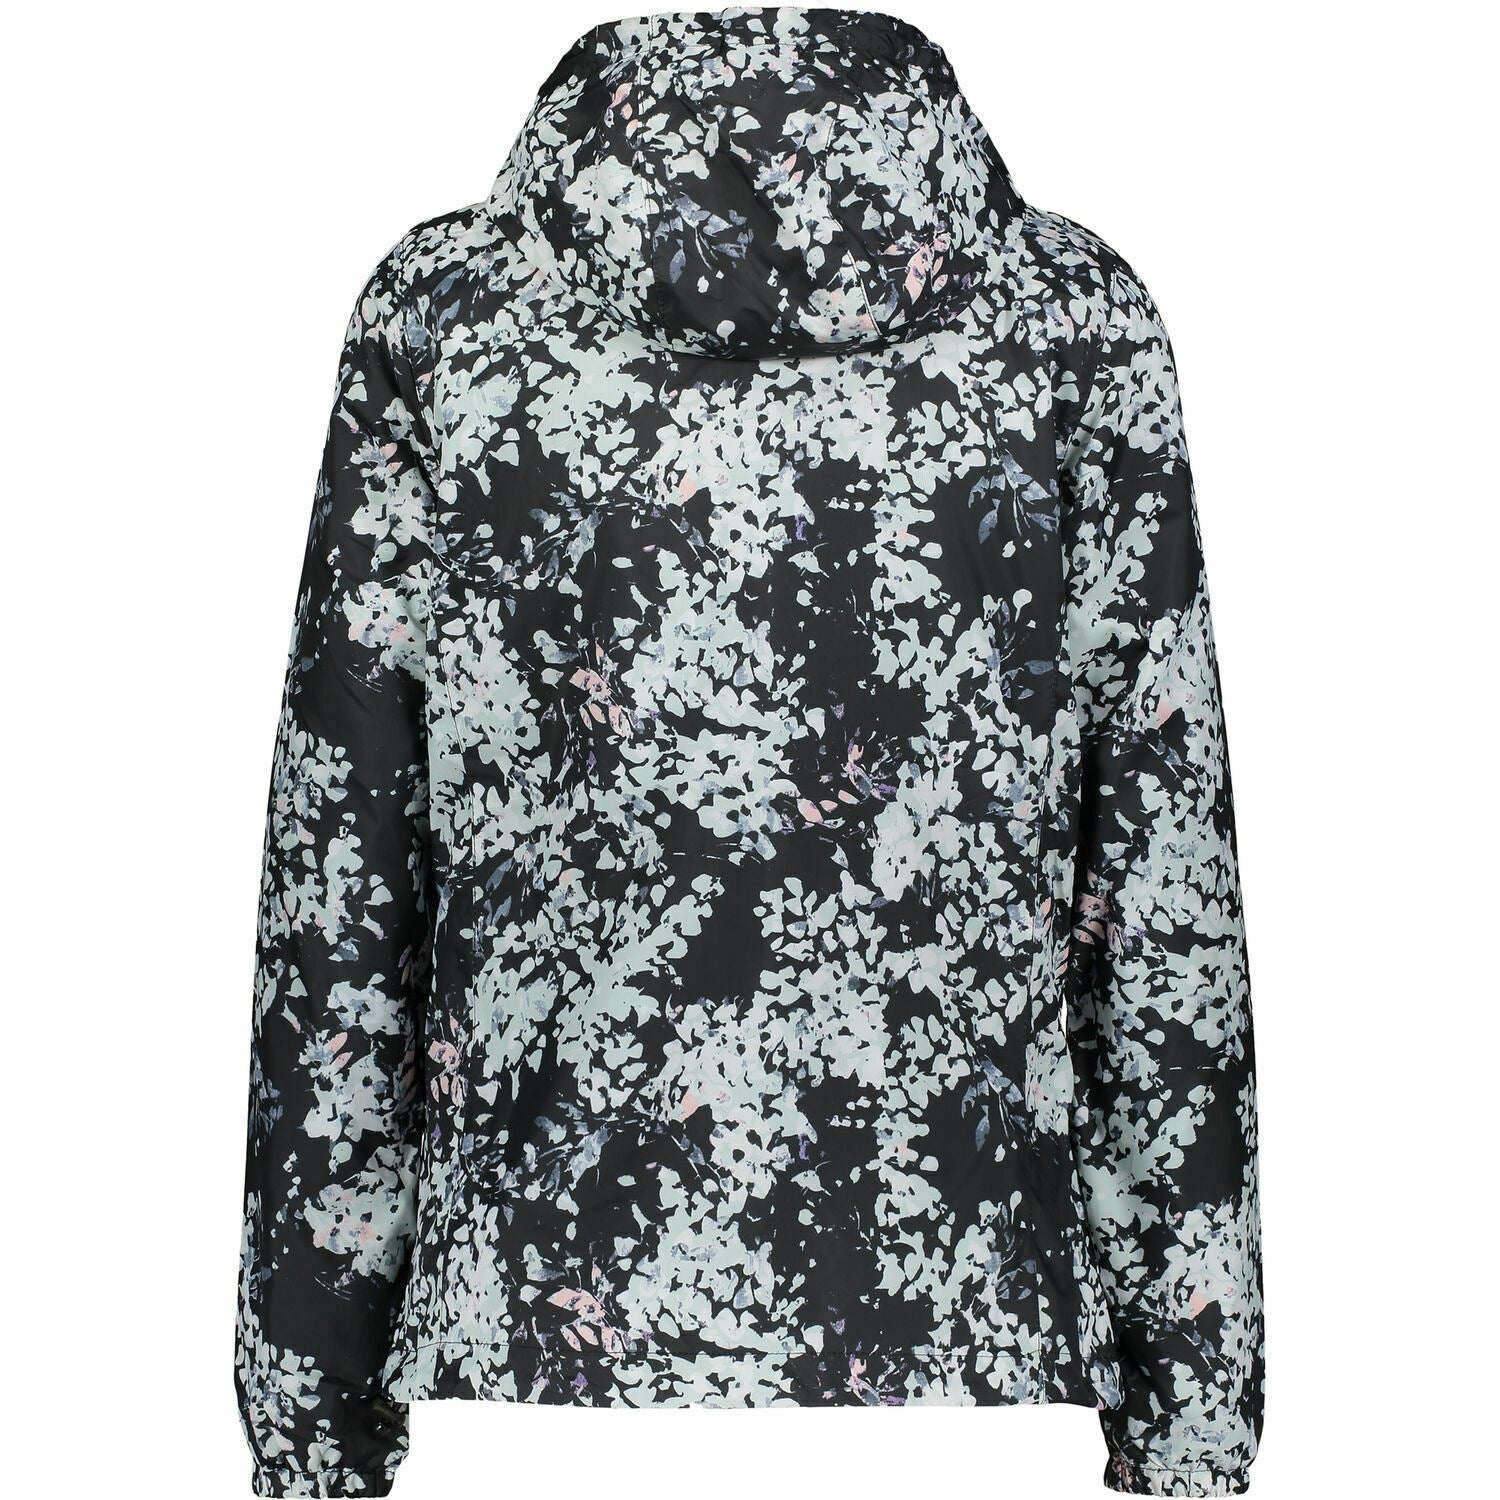 NEW BALANCE Women's Black/Grey Floral Printed Lightweight Hooded Jacket, size S